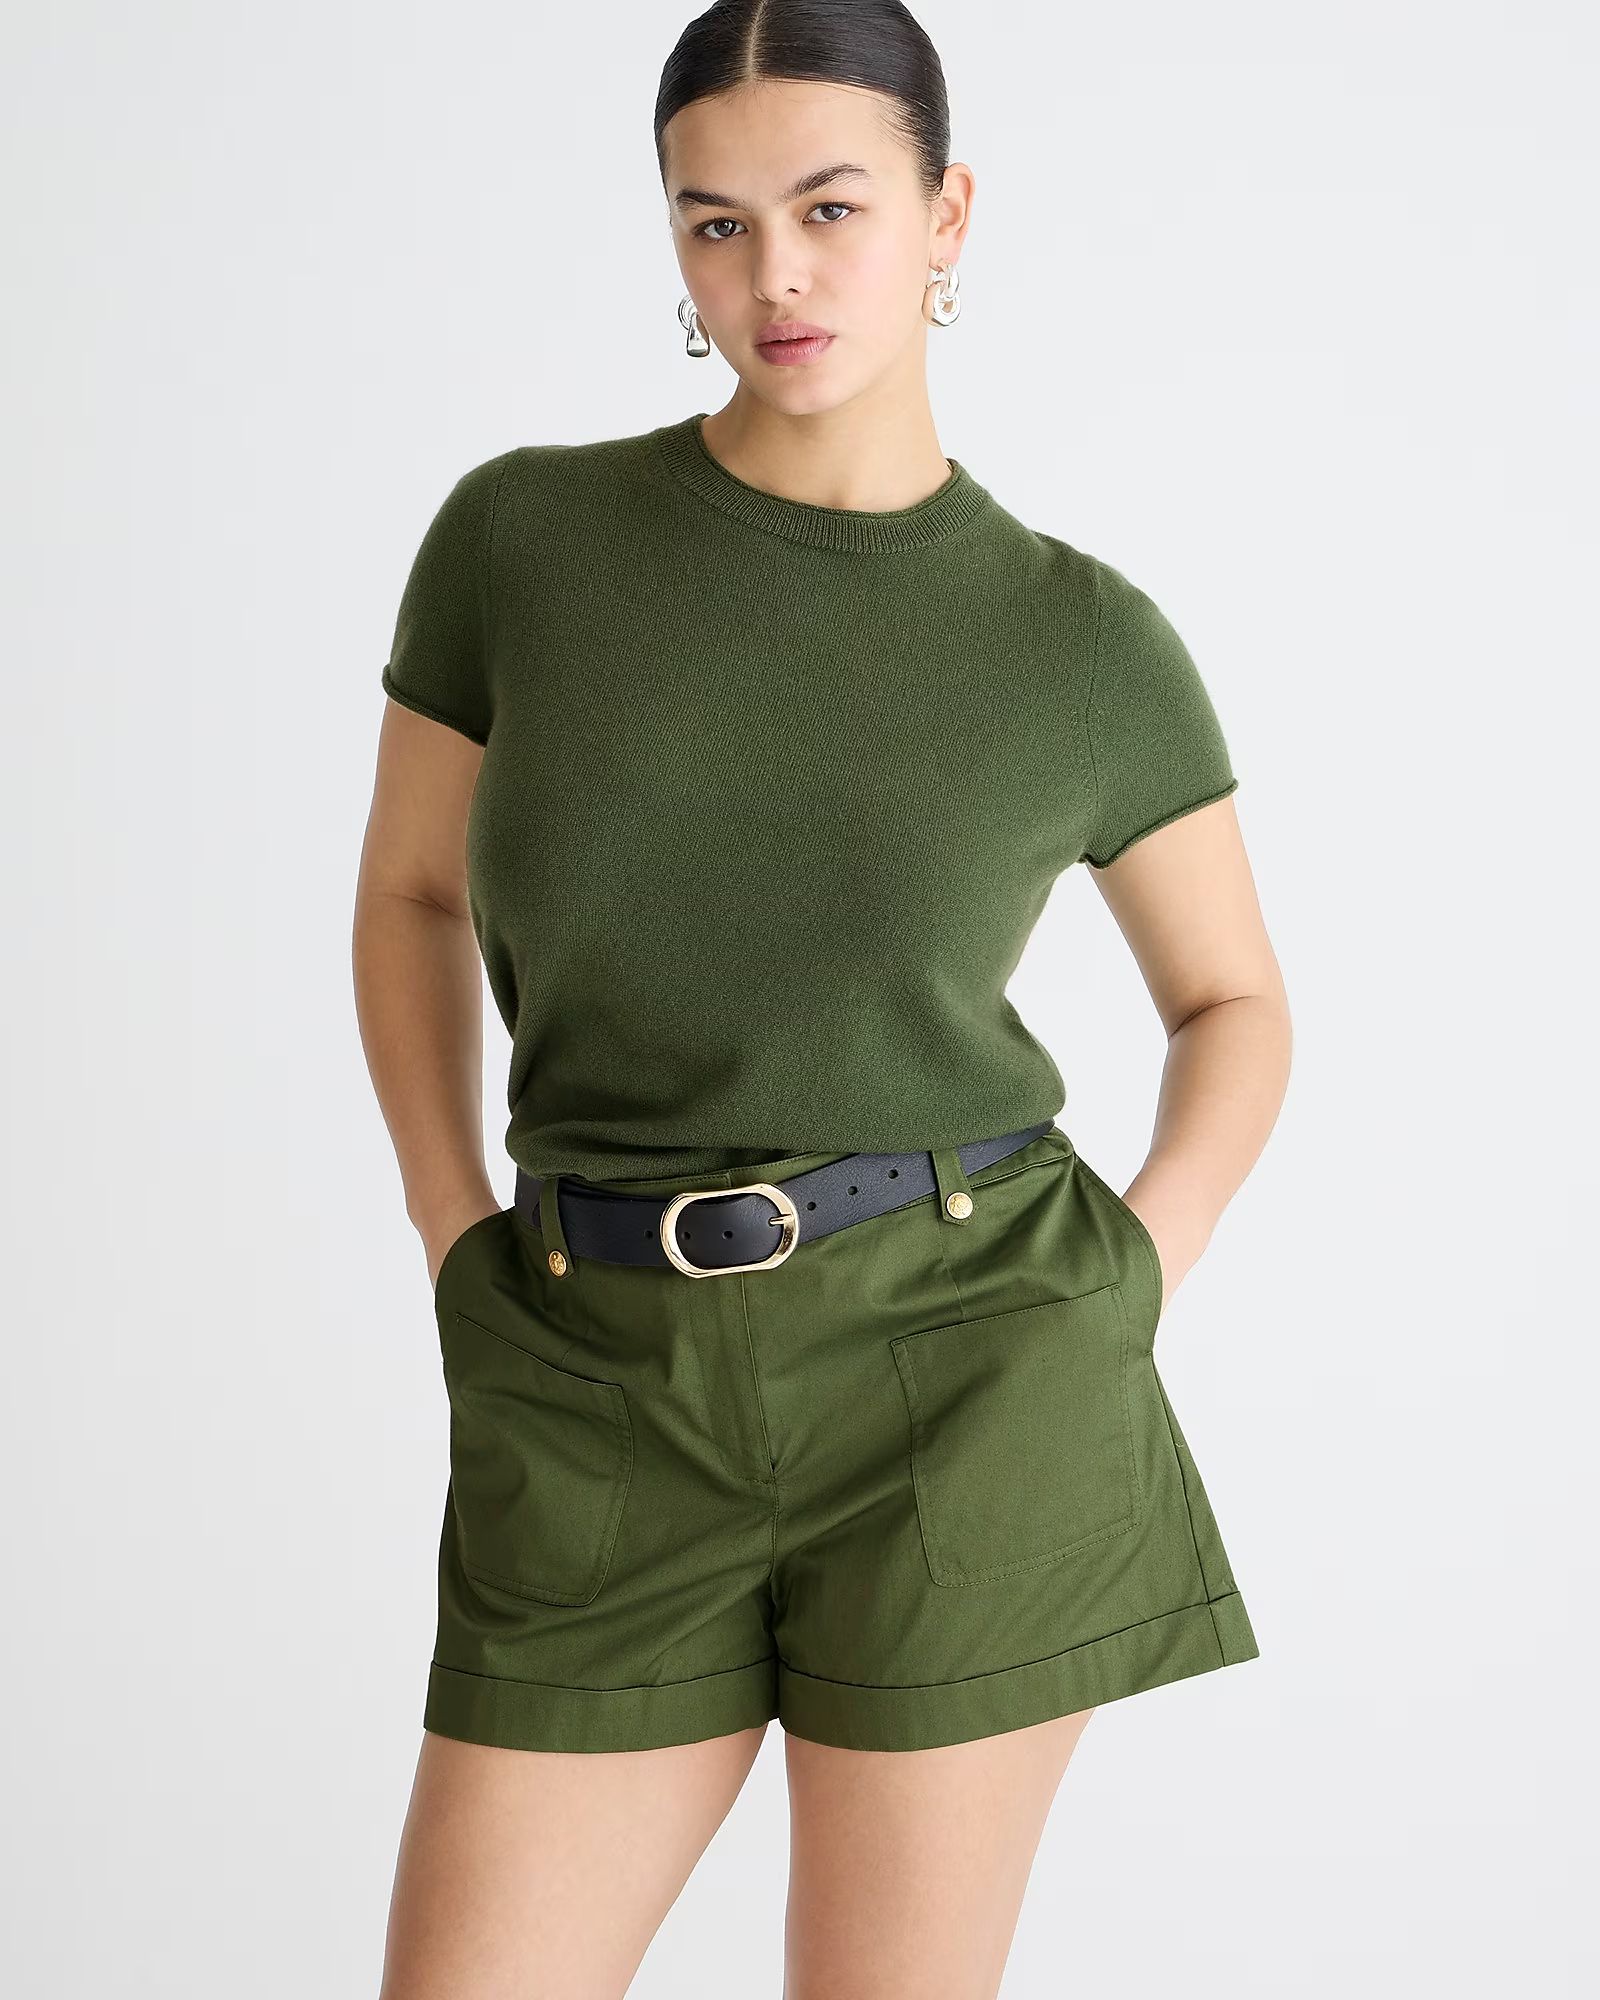 best sellerCashmere relaxed T-shirtUtility Green$128.00$118.00  Ship to homePick up in storeGet f... | J.Crew US